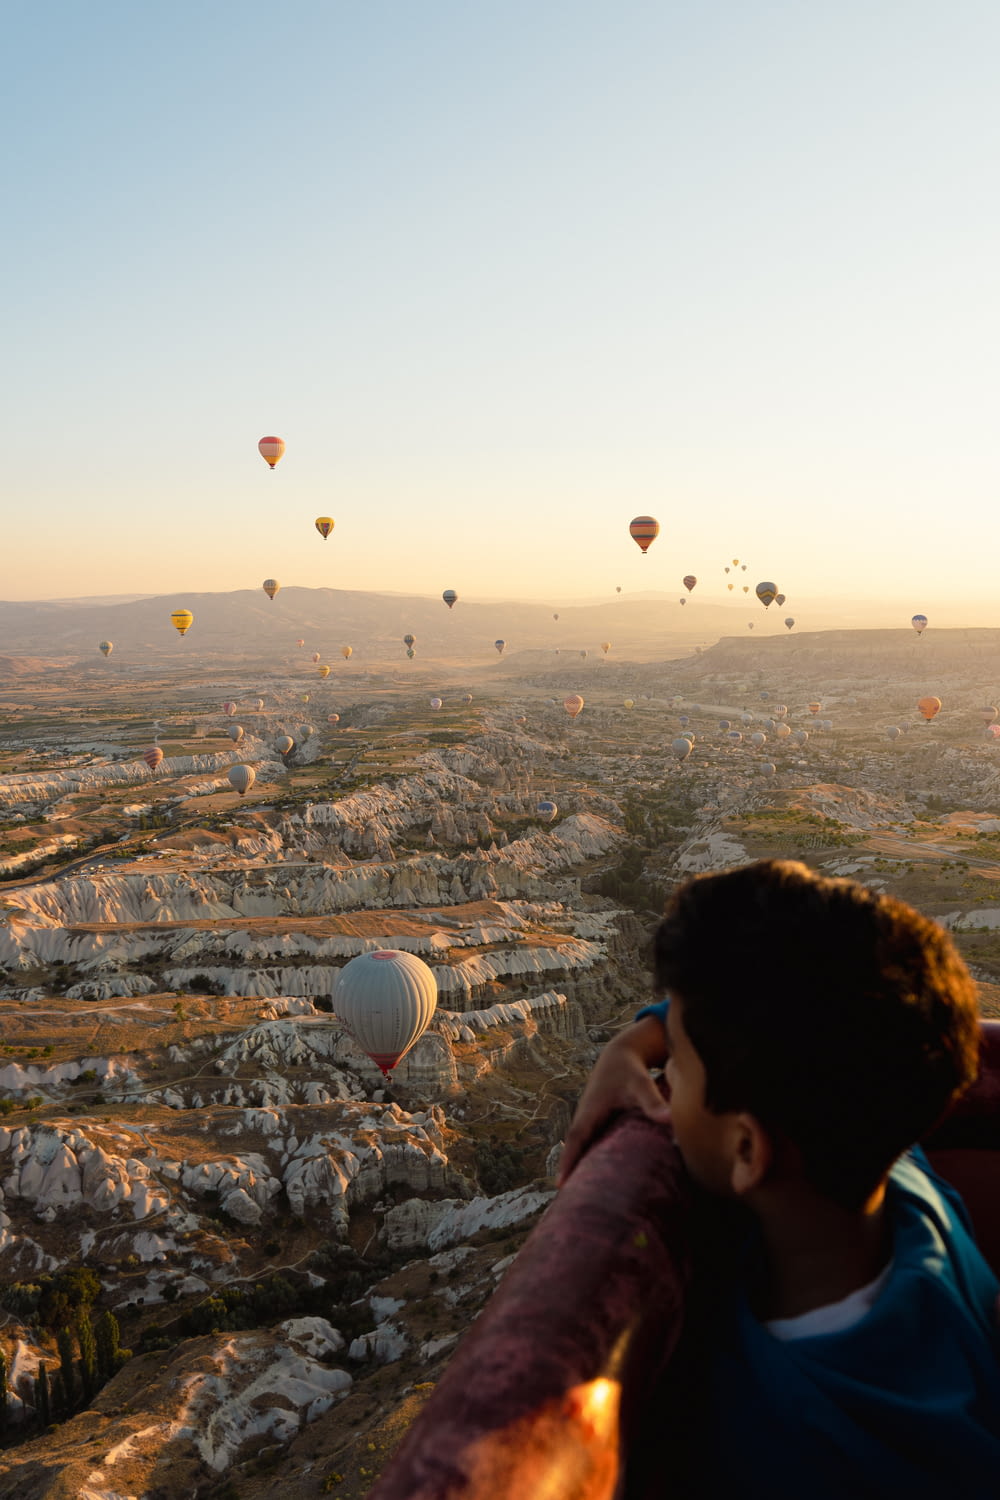 a man looking out over a valley with hot air balloons in the sky